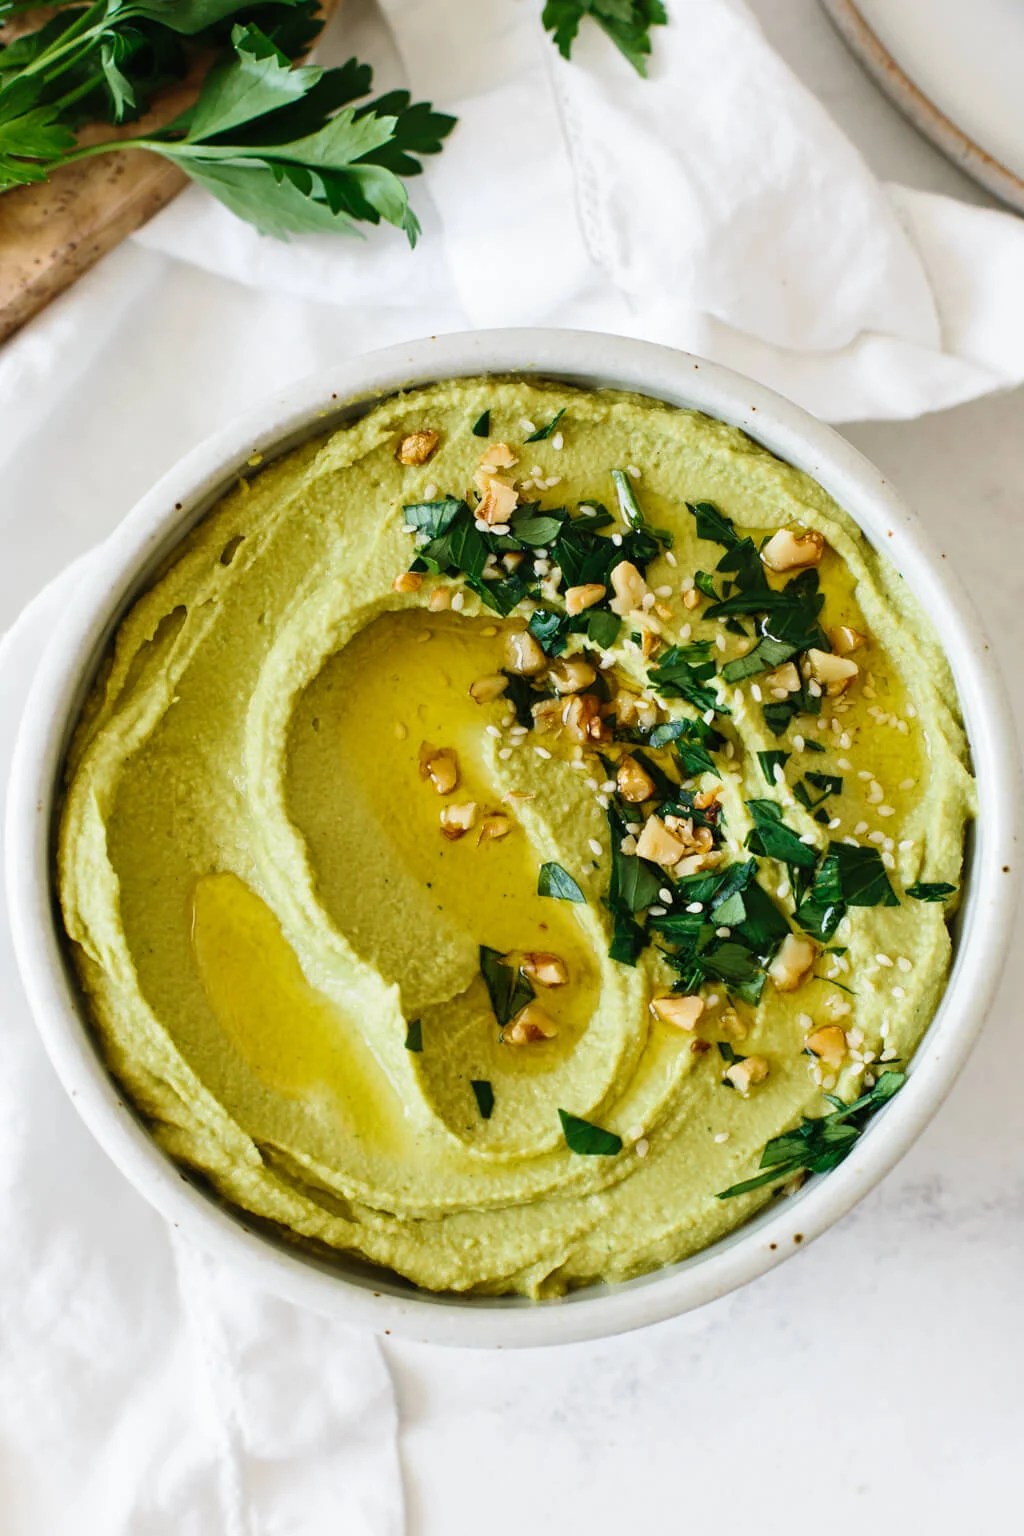 Green hummus in a bowl with herbs and toppings.